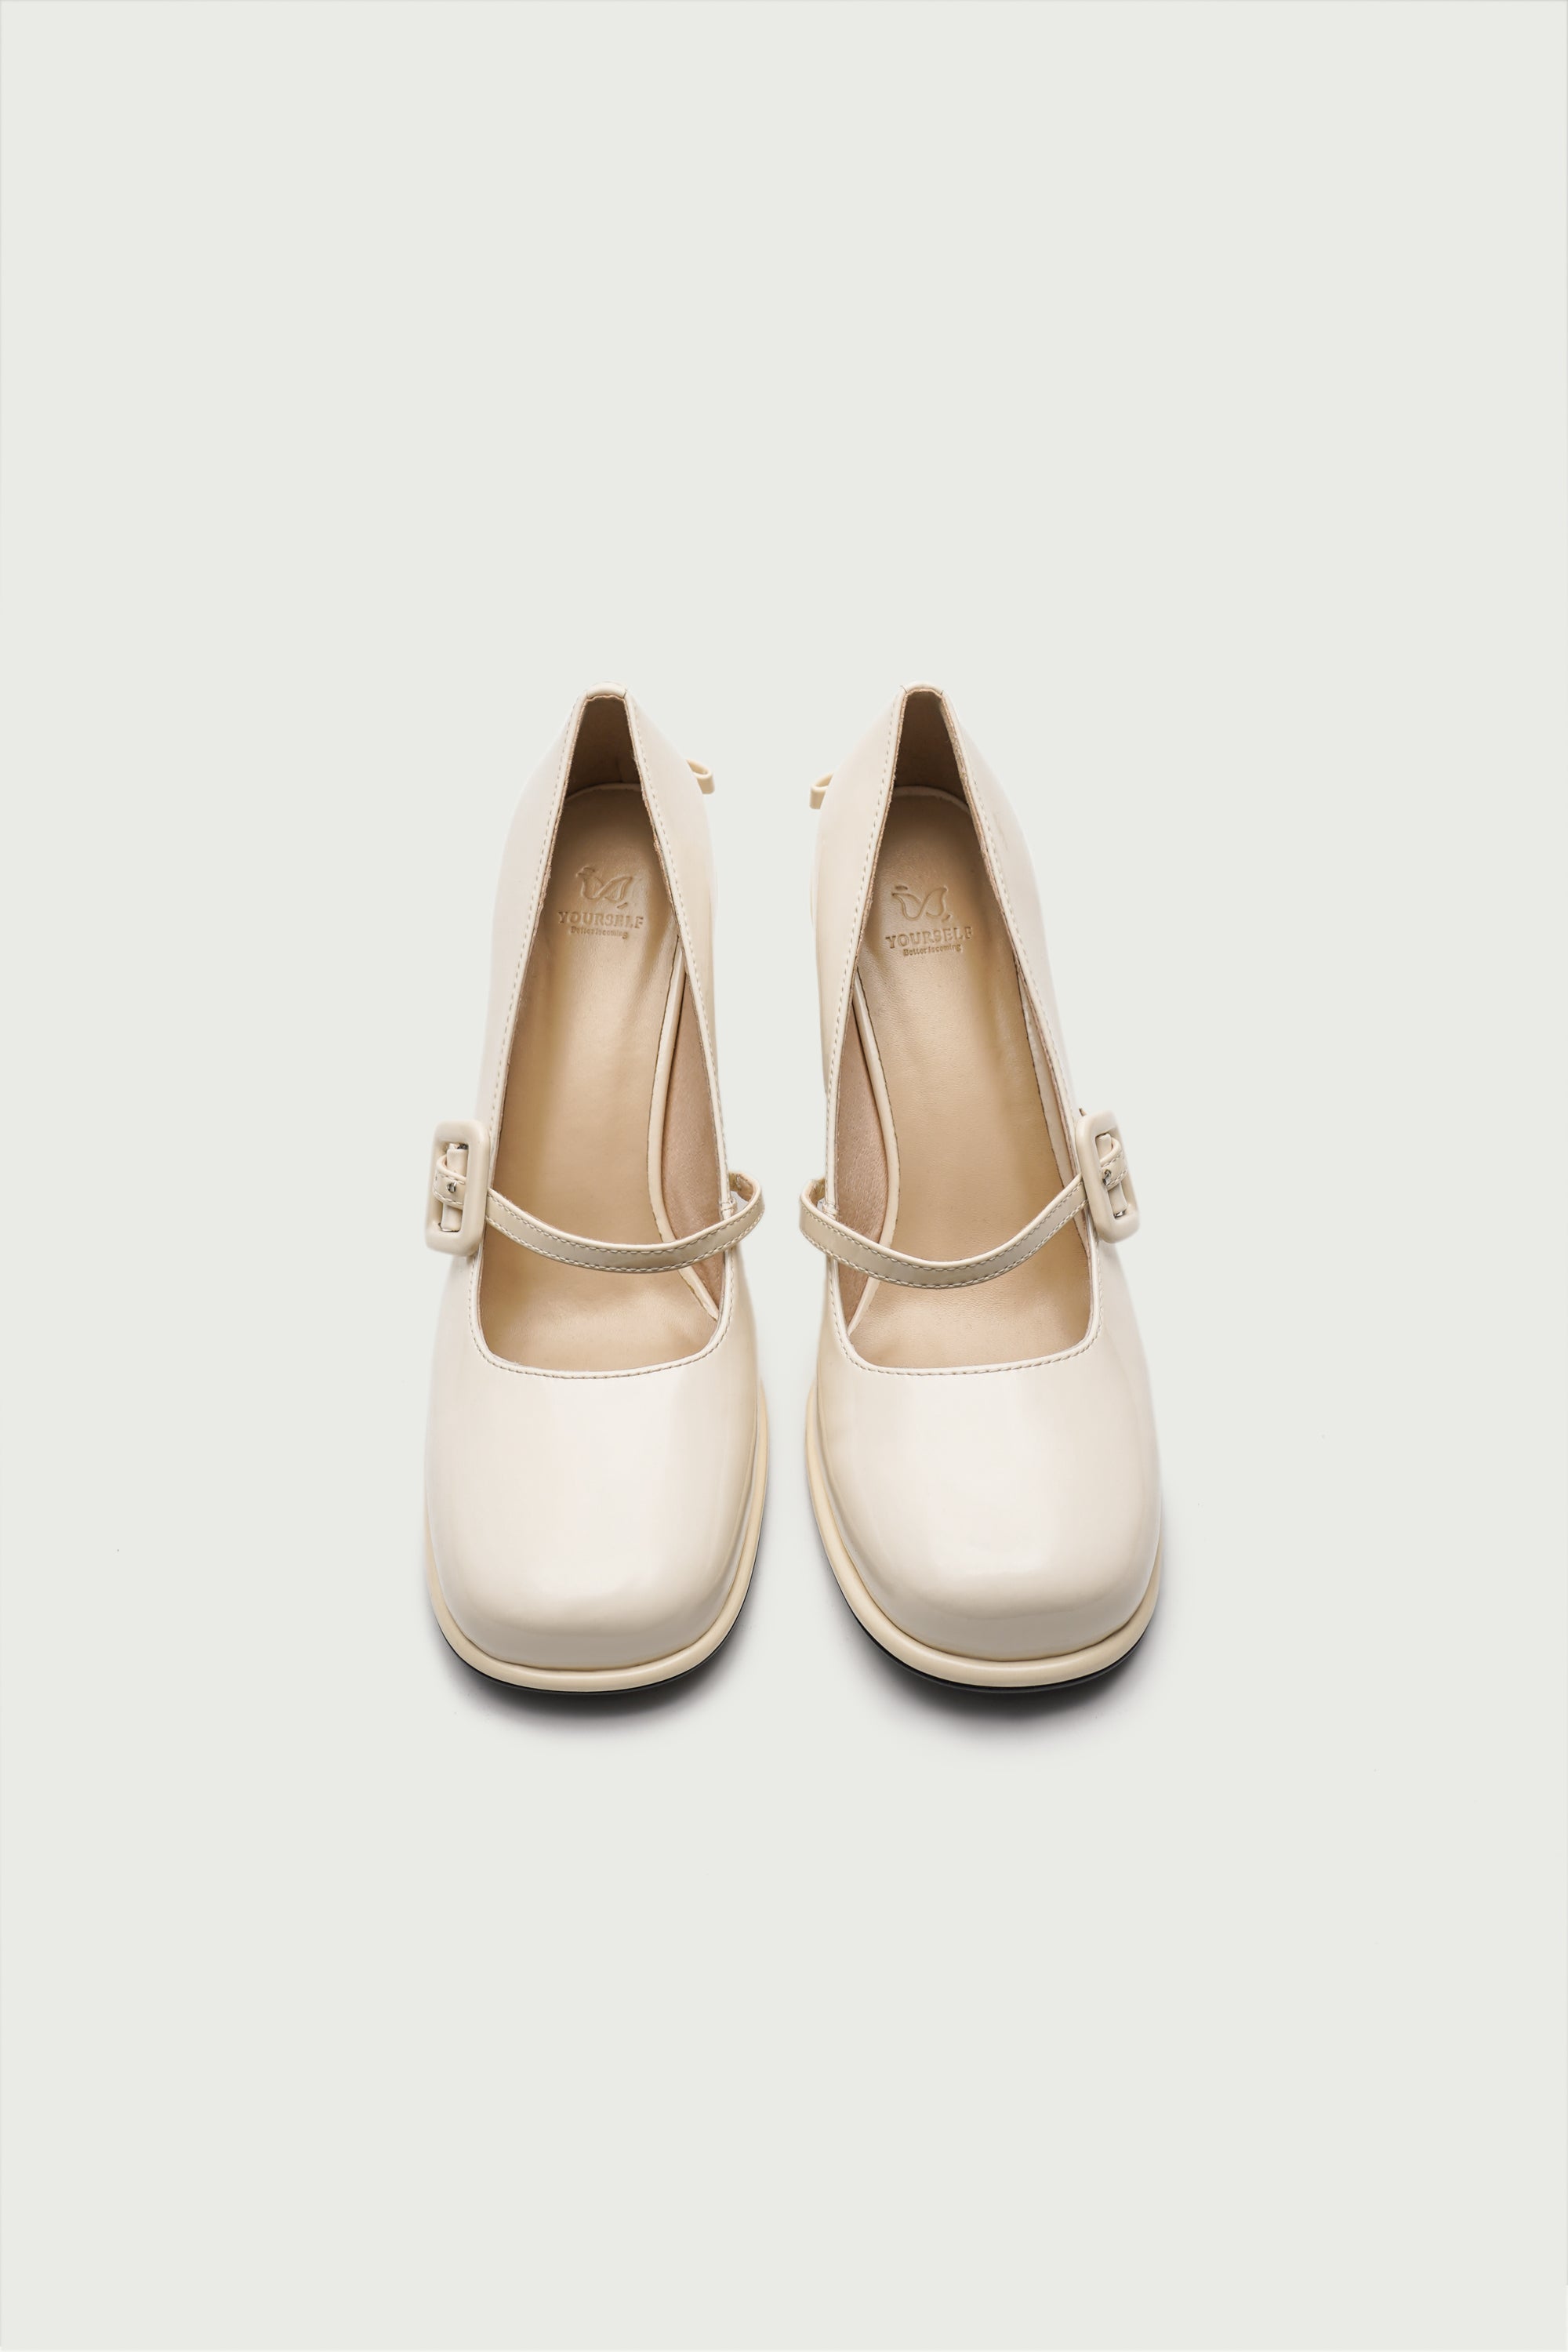 Doll House Leather Pumps - White